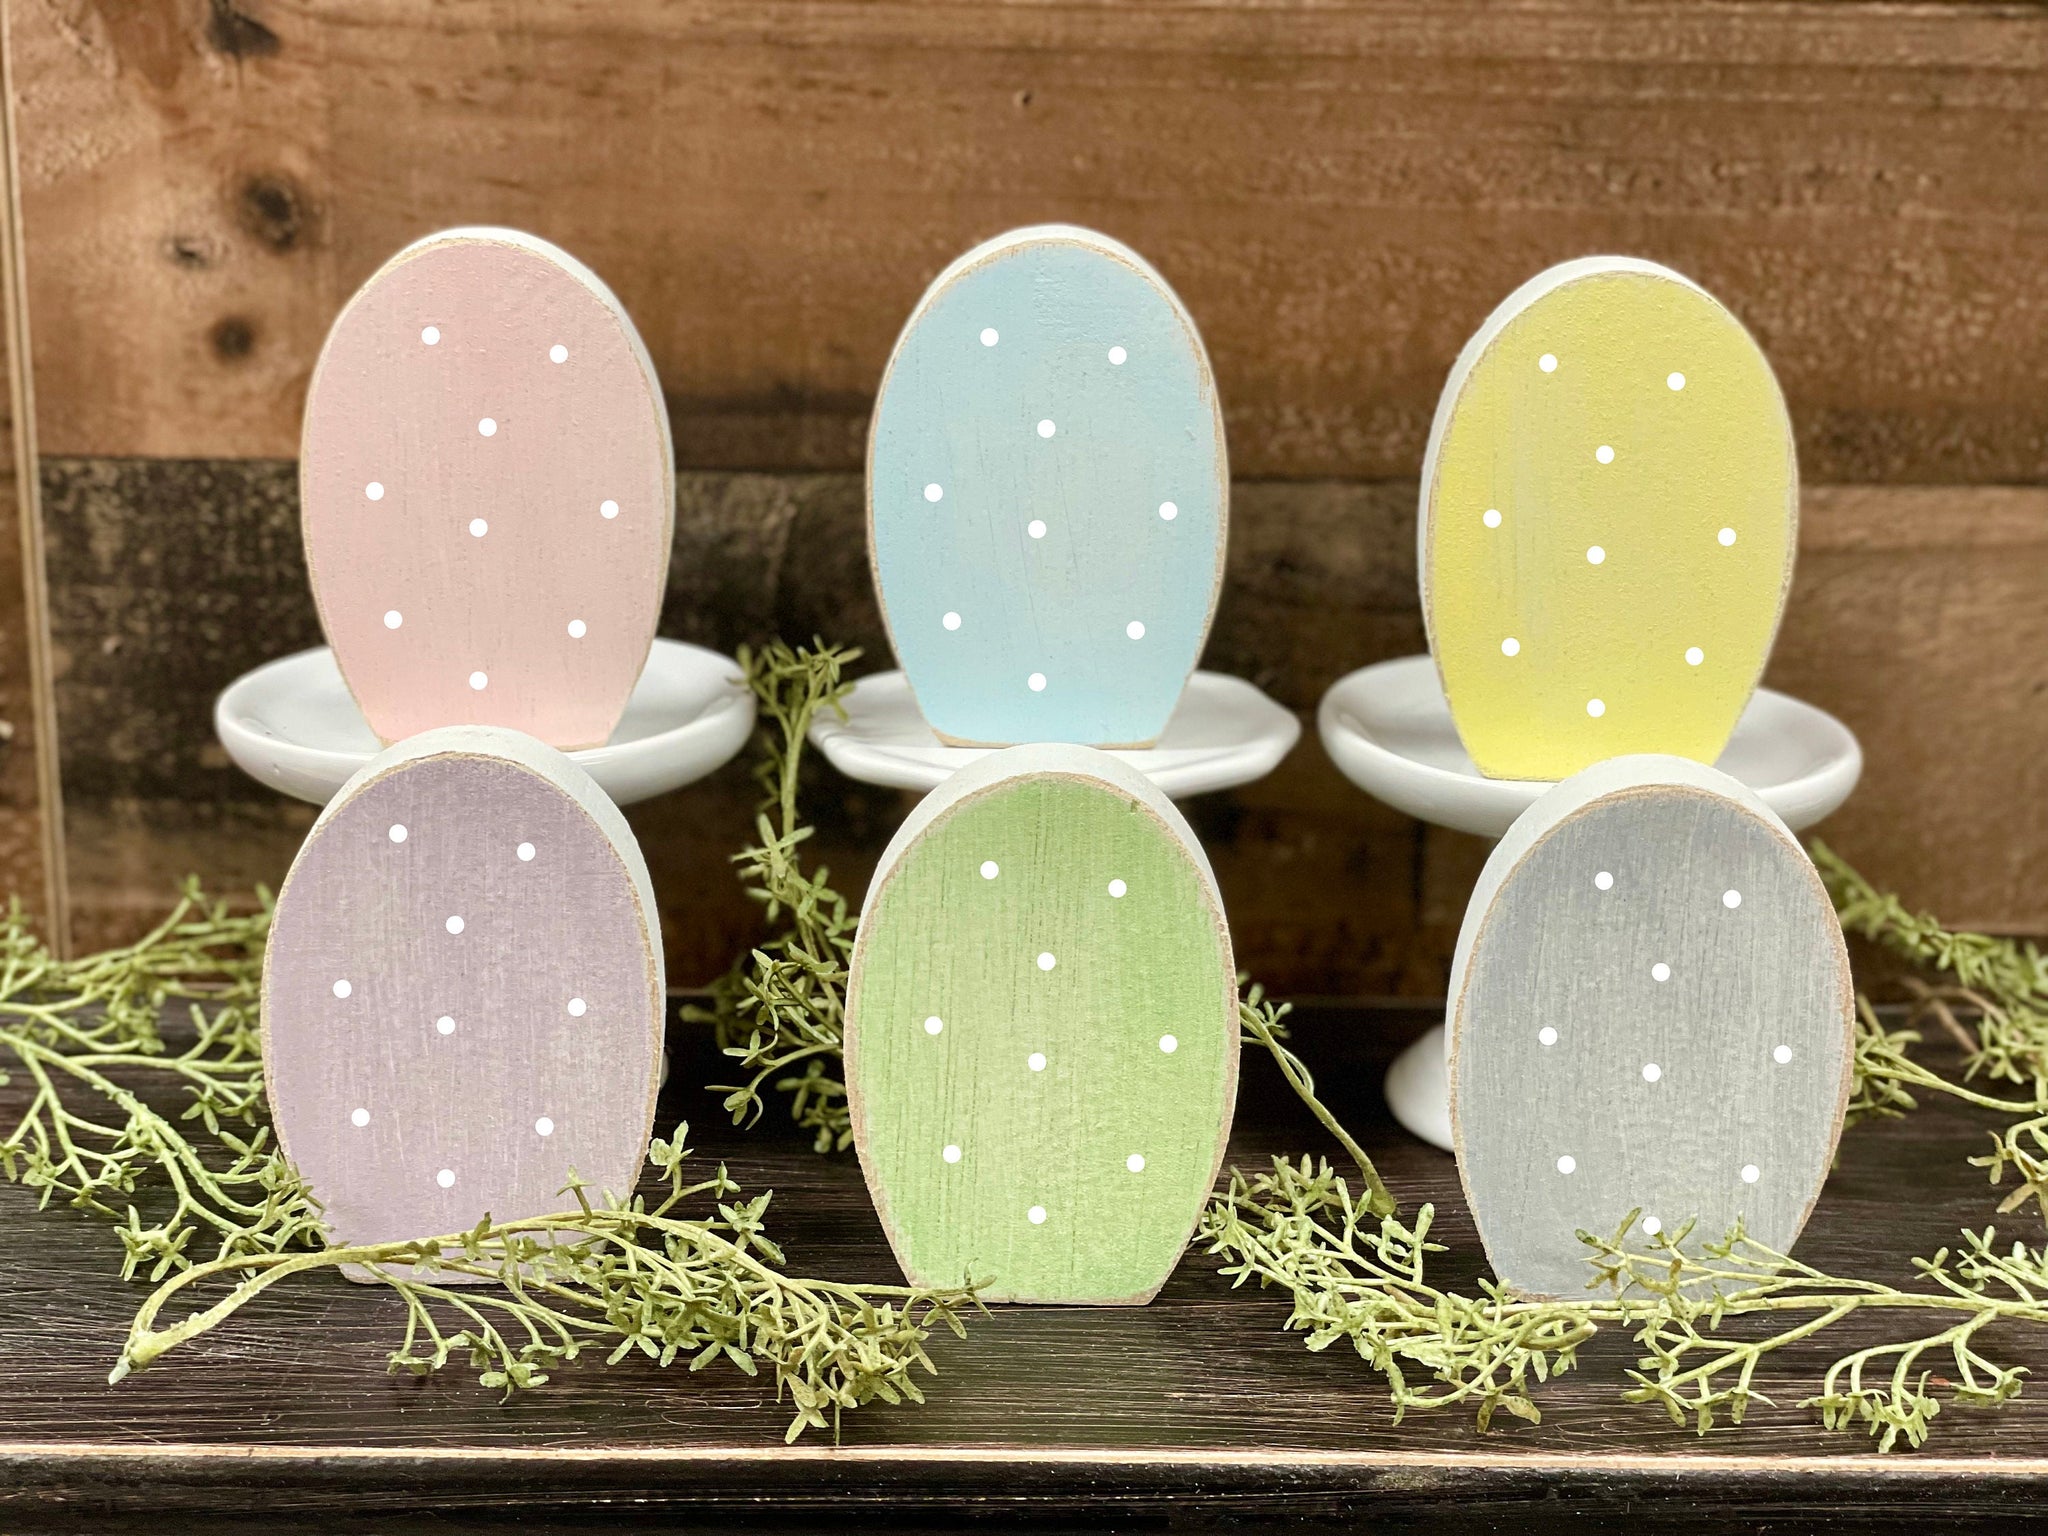 Wood Easter egg, Set of 3, Rustic Easter decor, Tiered tray, Polka dot eggs, Spring decorations